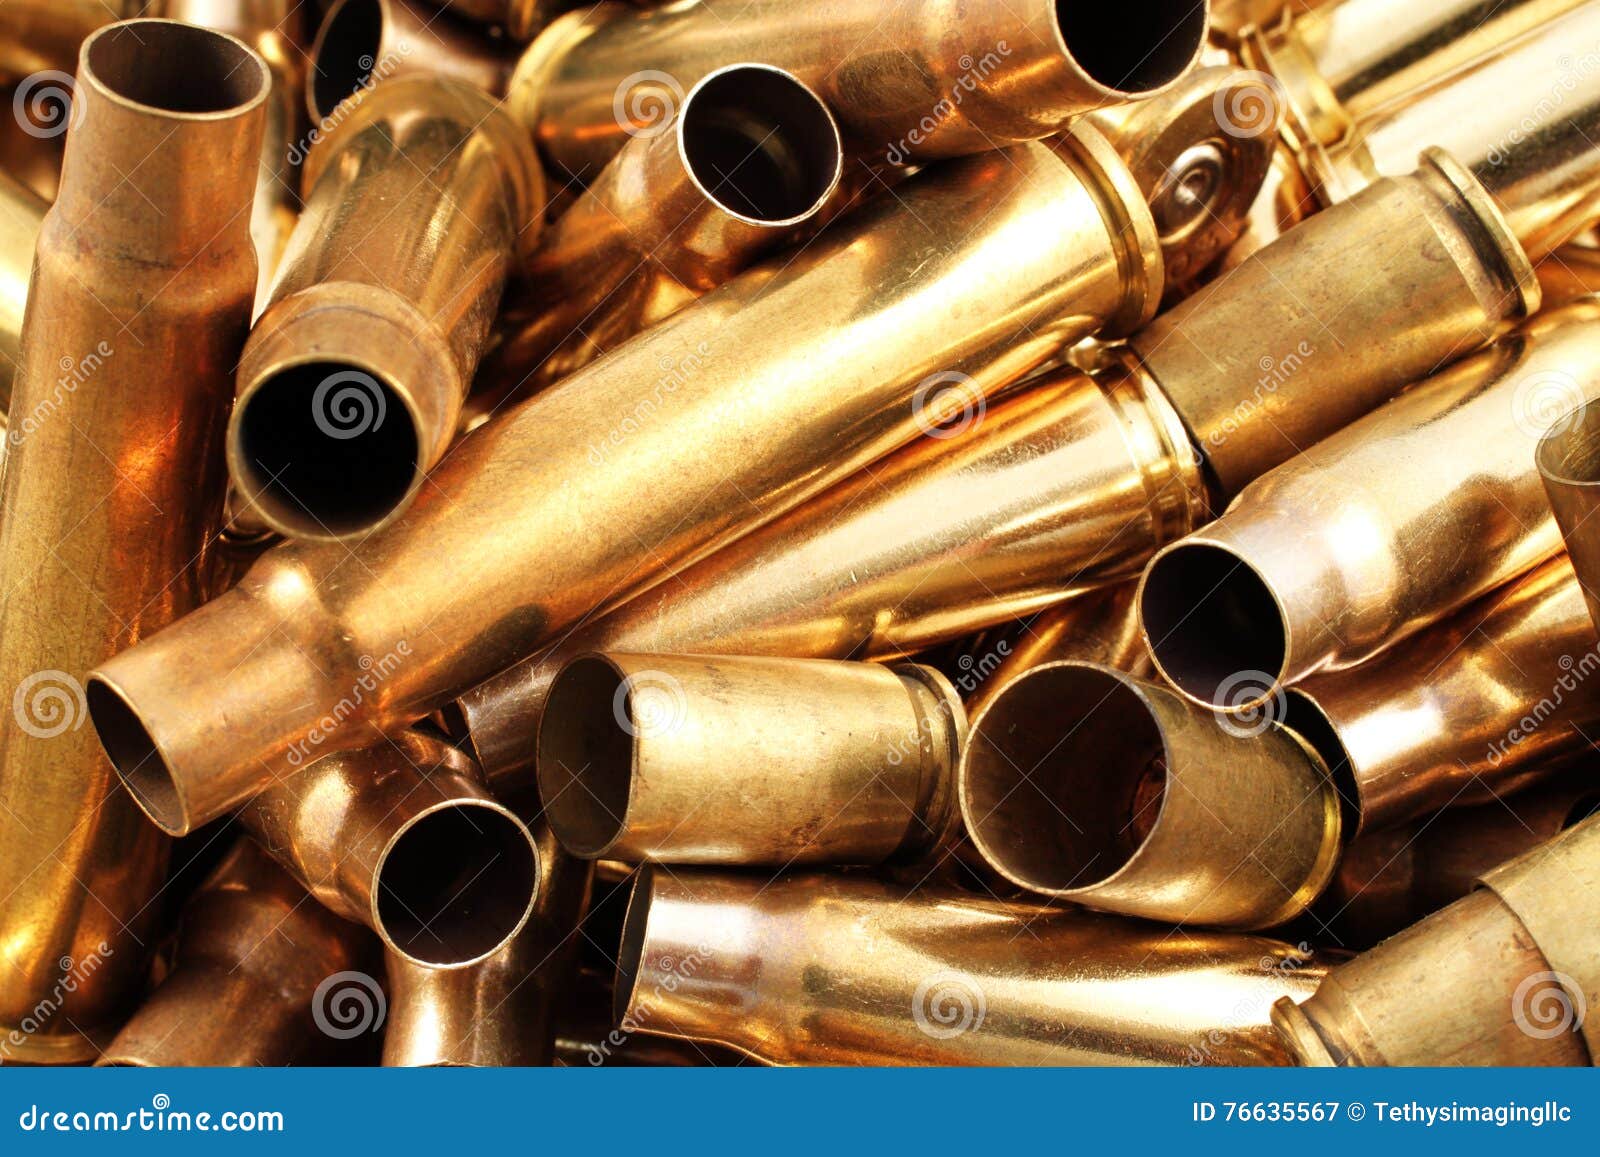 https://thumbs.dreamstime.com/z/empty-bullet-casings-close-up-used-assorted-spent-brass-76635567.jpg